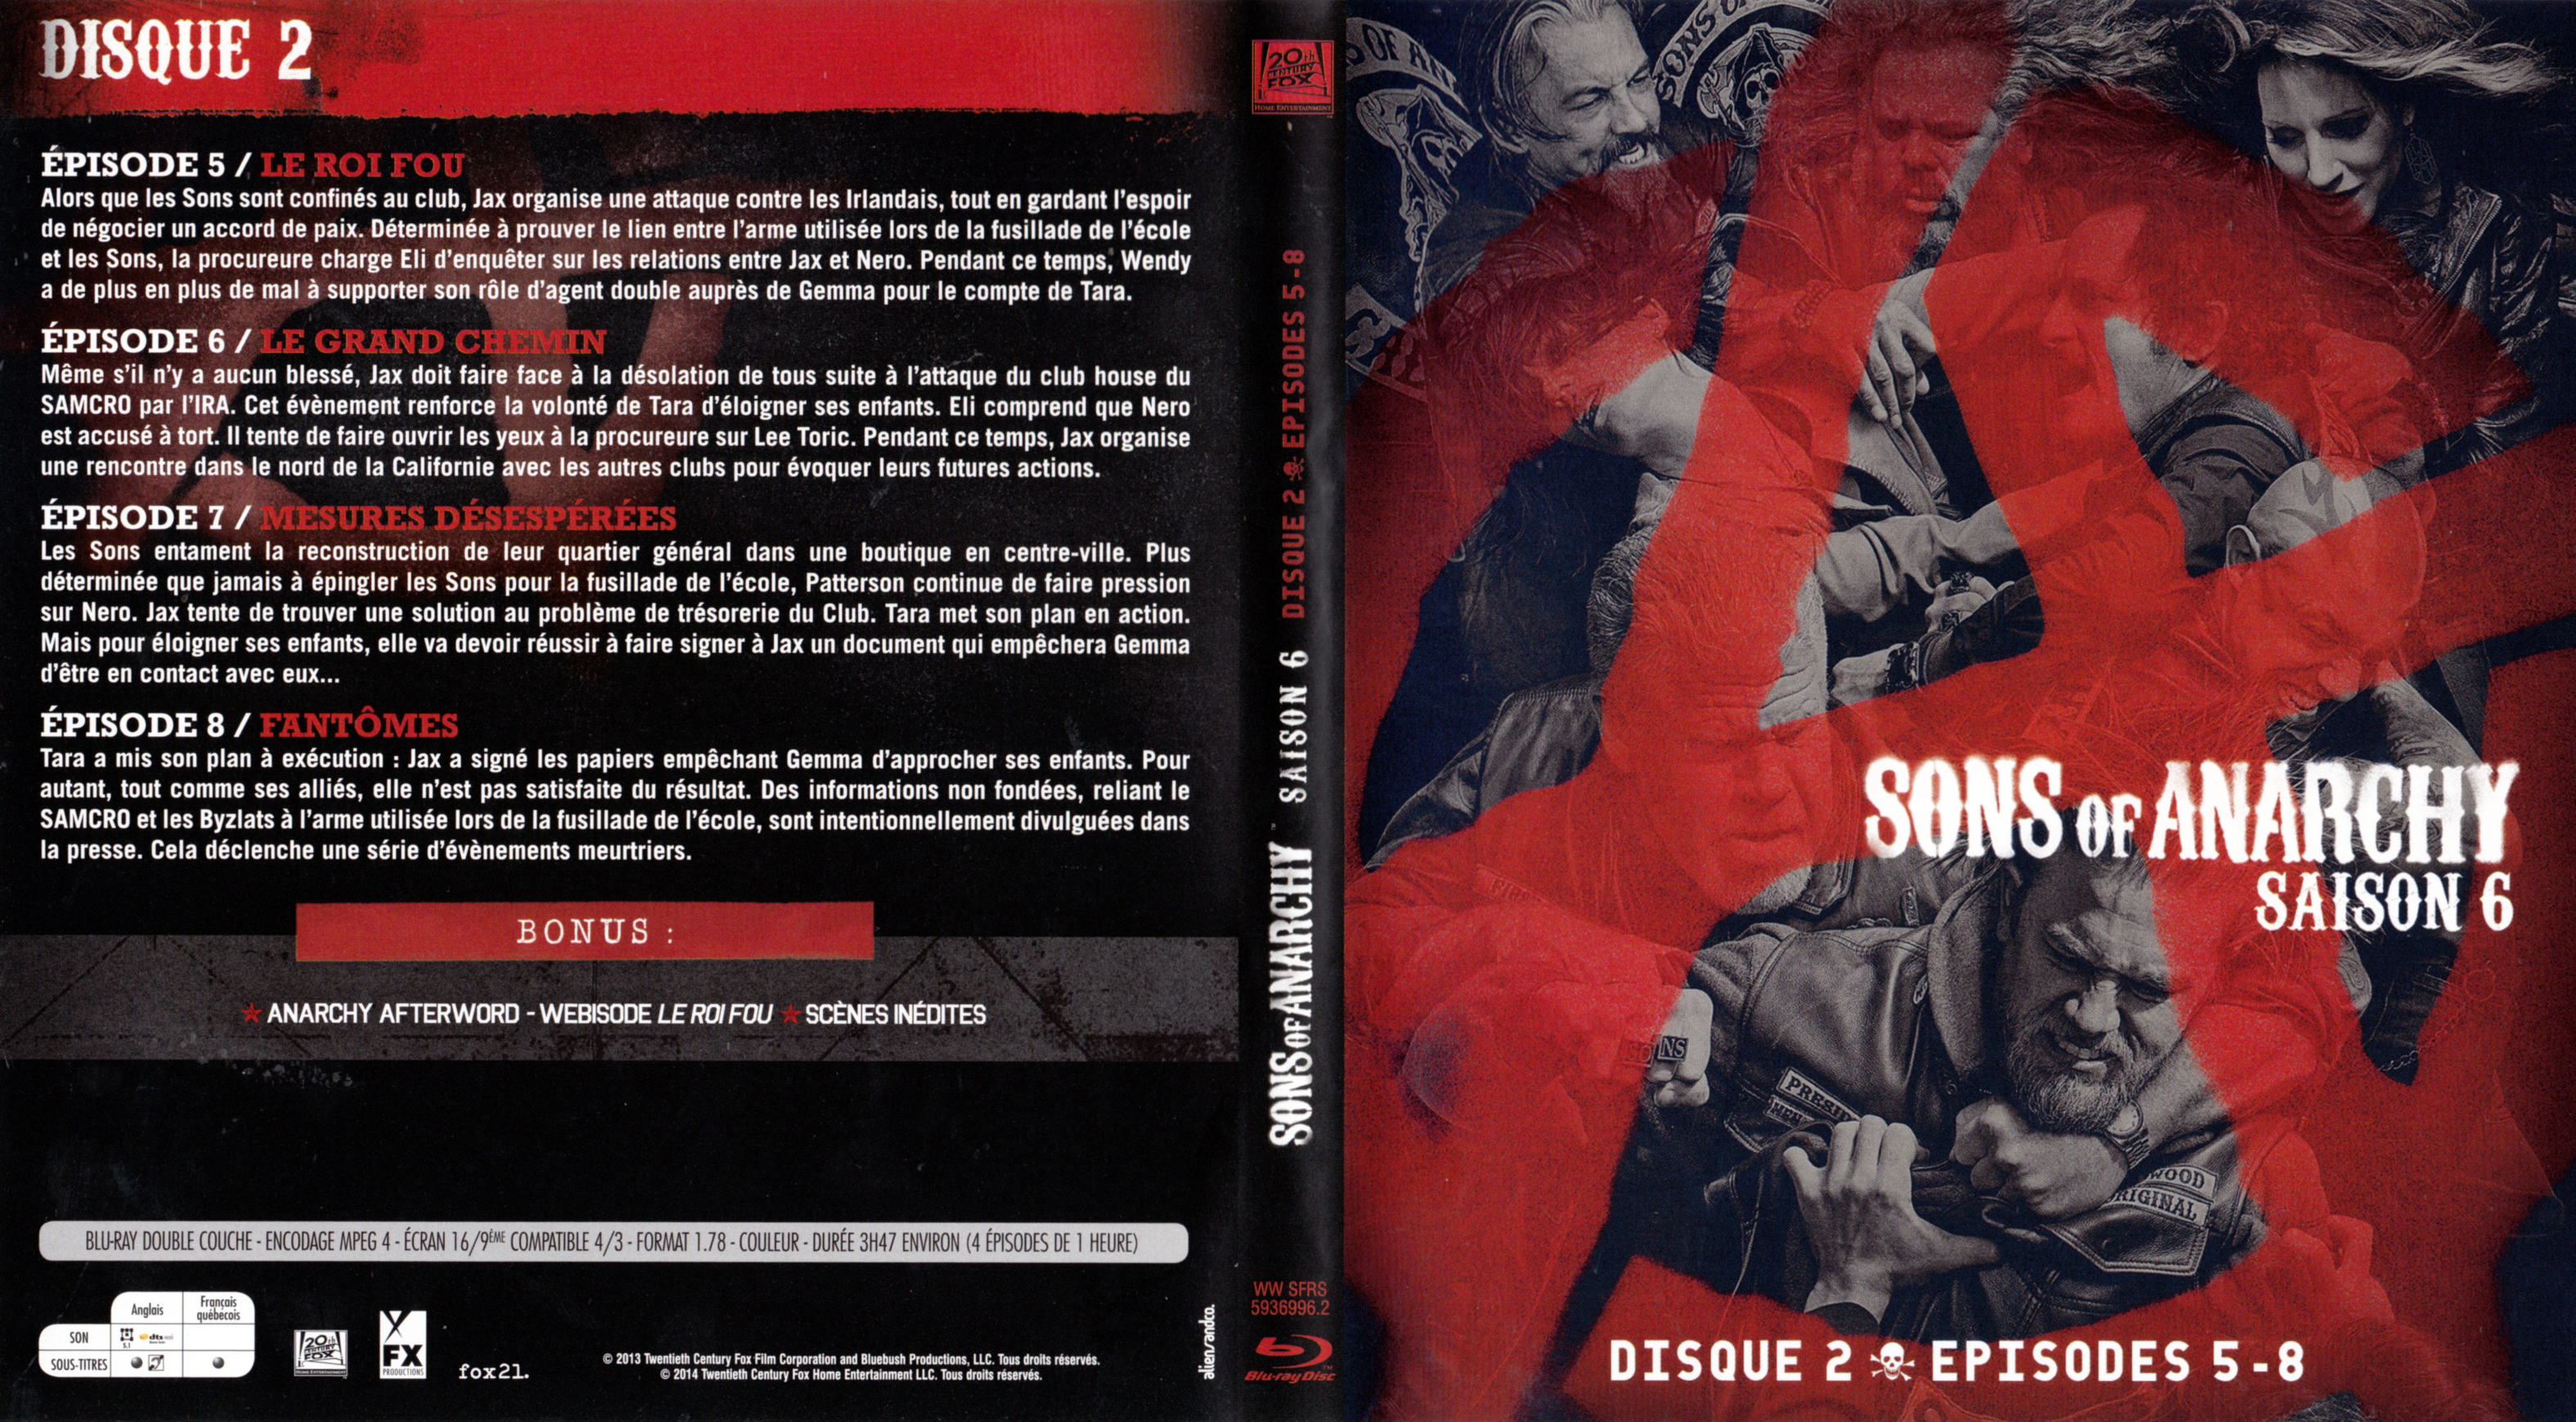 Jaquette DVD Sons of anarchy Saison 6 DISC 2 (BLU-RAY)